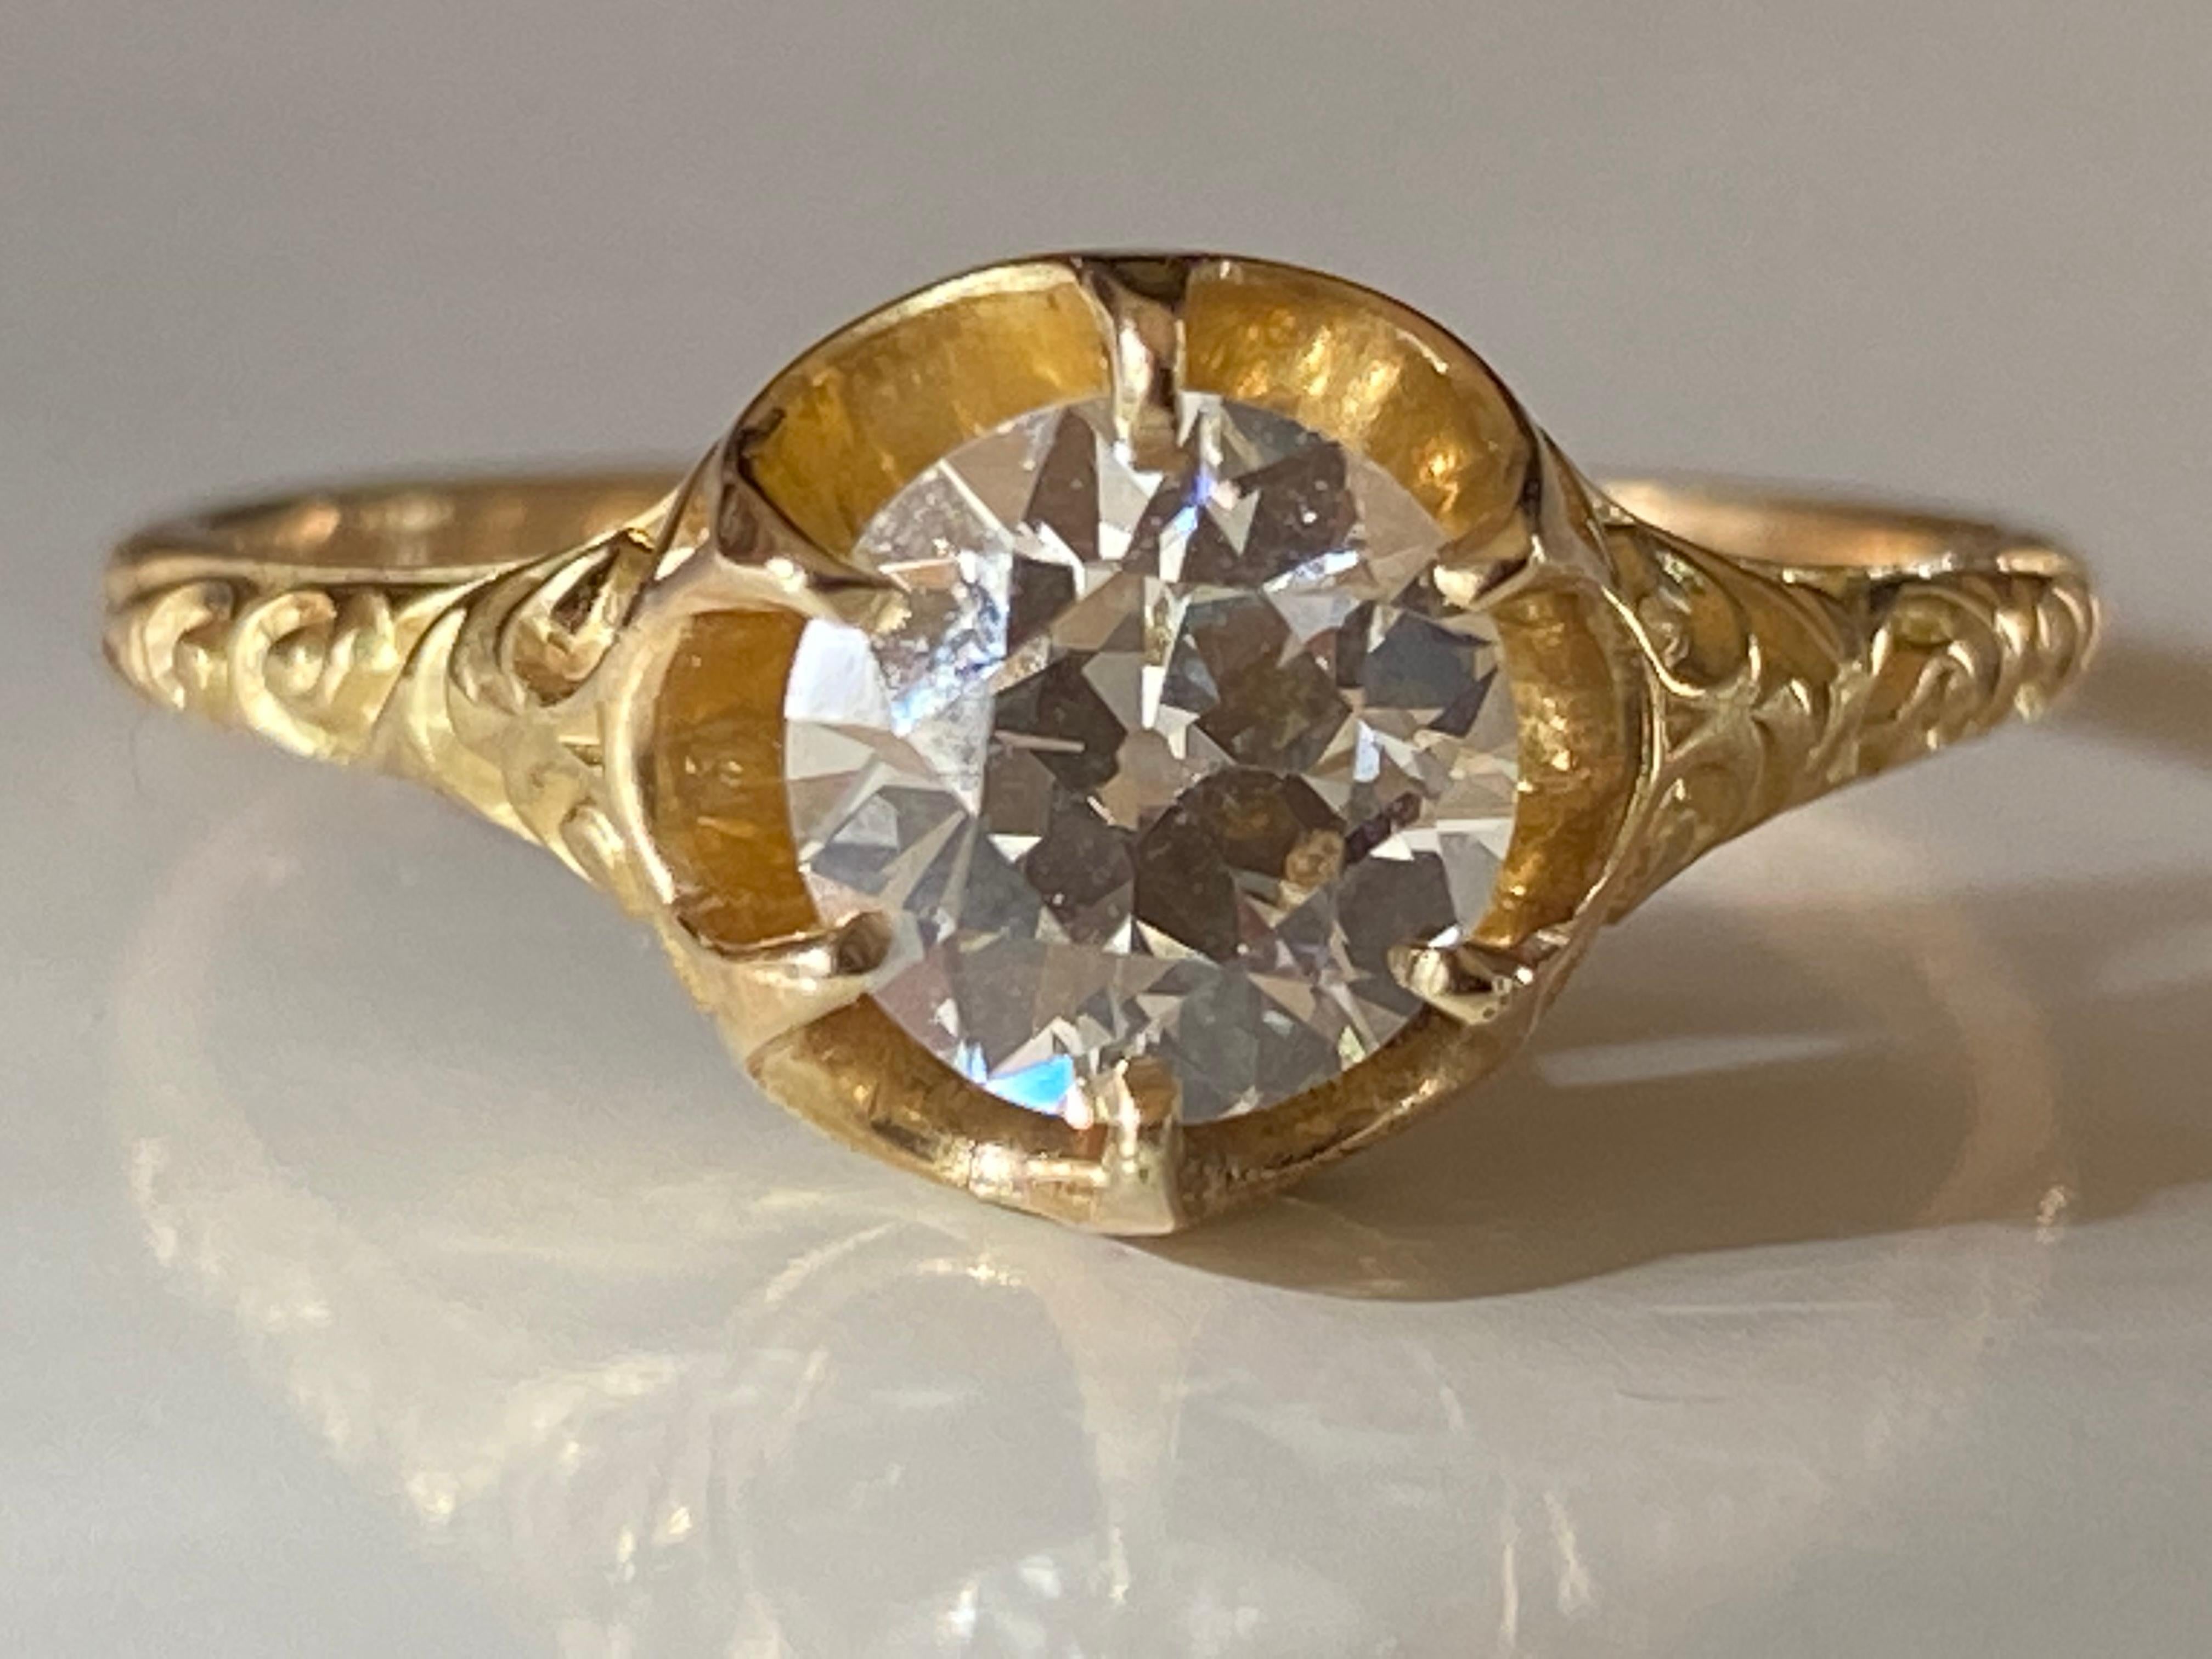 This shimmering GIA certified Old European cut diamond center stone measuring 1.01 carats, L color, VS1 clarity is held in a six prong claw setting on a delicate band handcrafted in 18kt yellow gold and adorned with delicate swirling engravings. 

